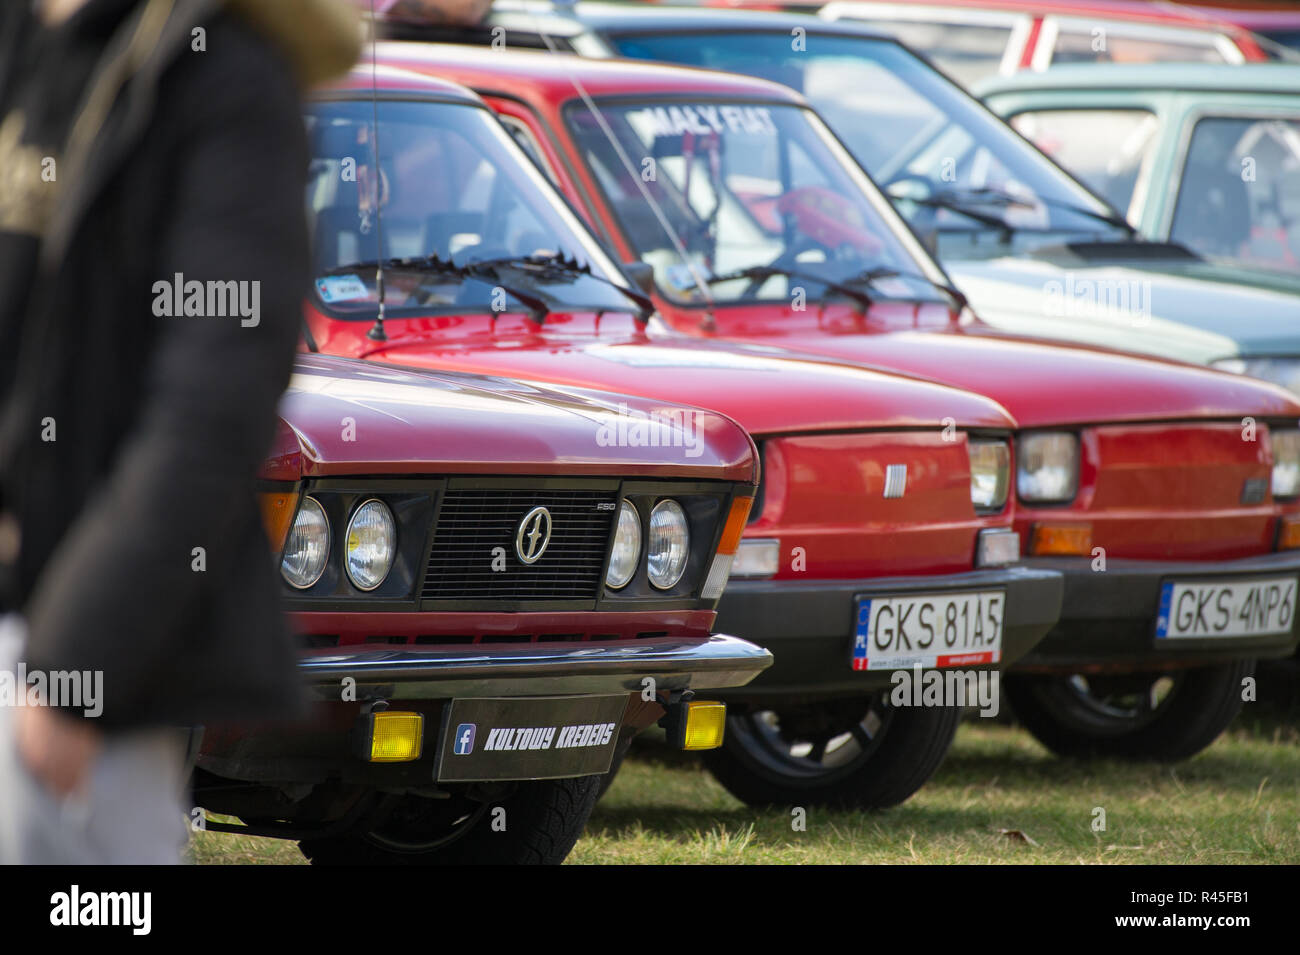 Fiat 126p High Resolution Stock Photography and Images Alamy